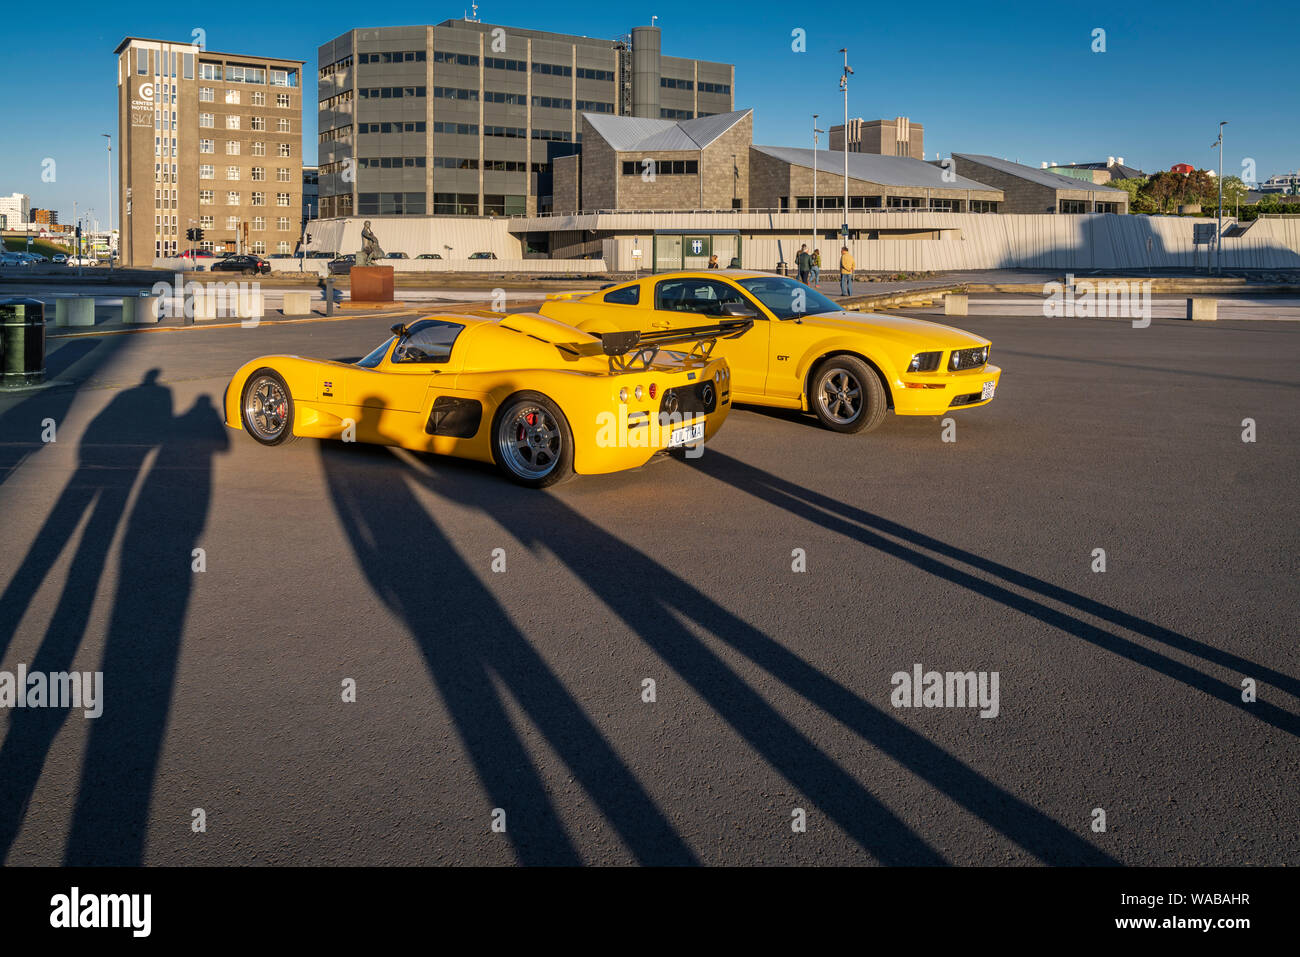 Yellow Ultima and Mustang on display, Independence Day, Reykjavik, Iceland Stock Photo